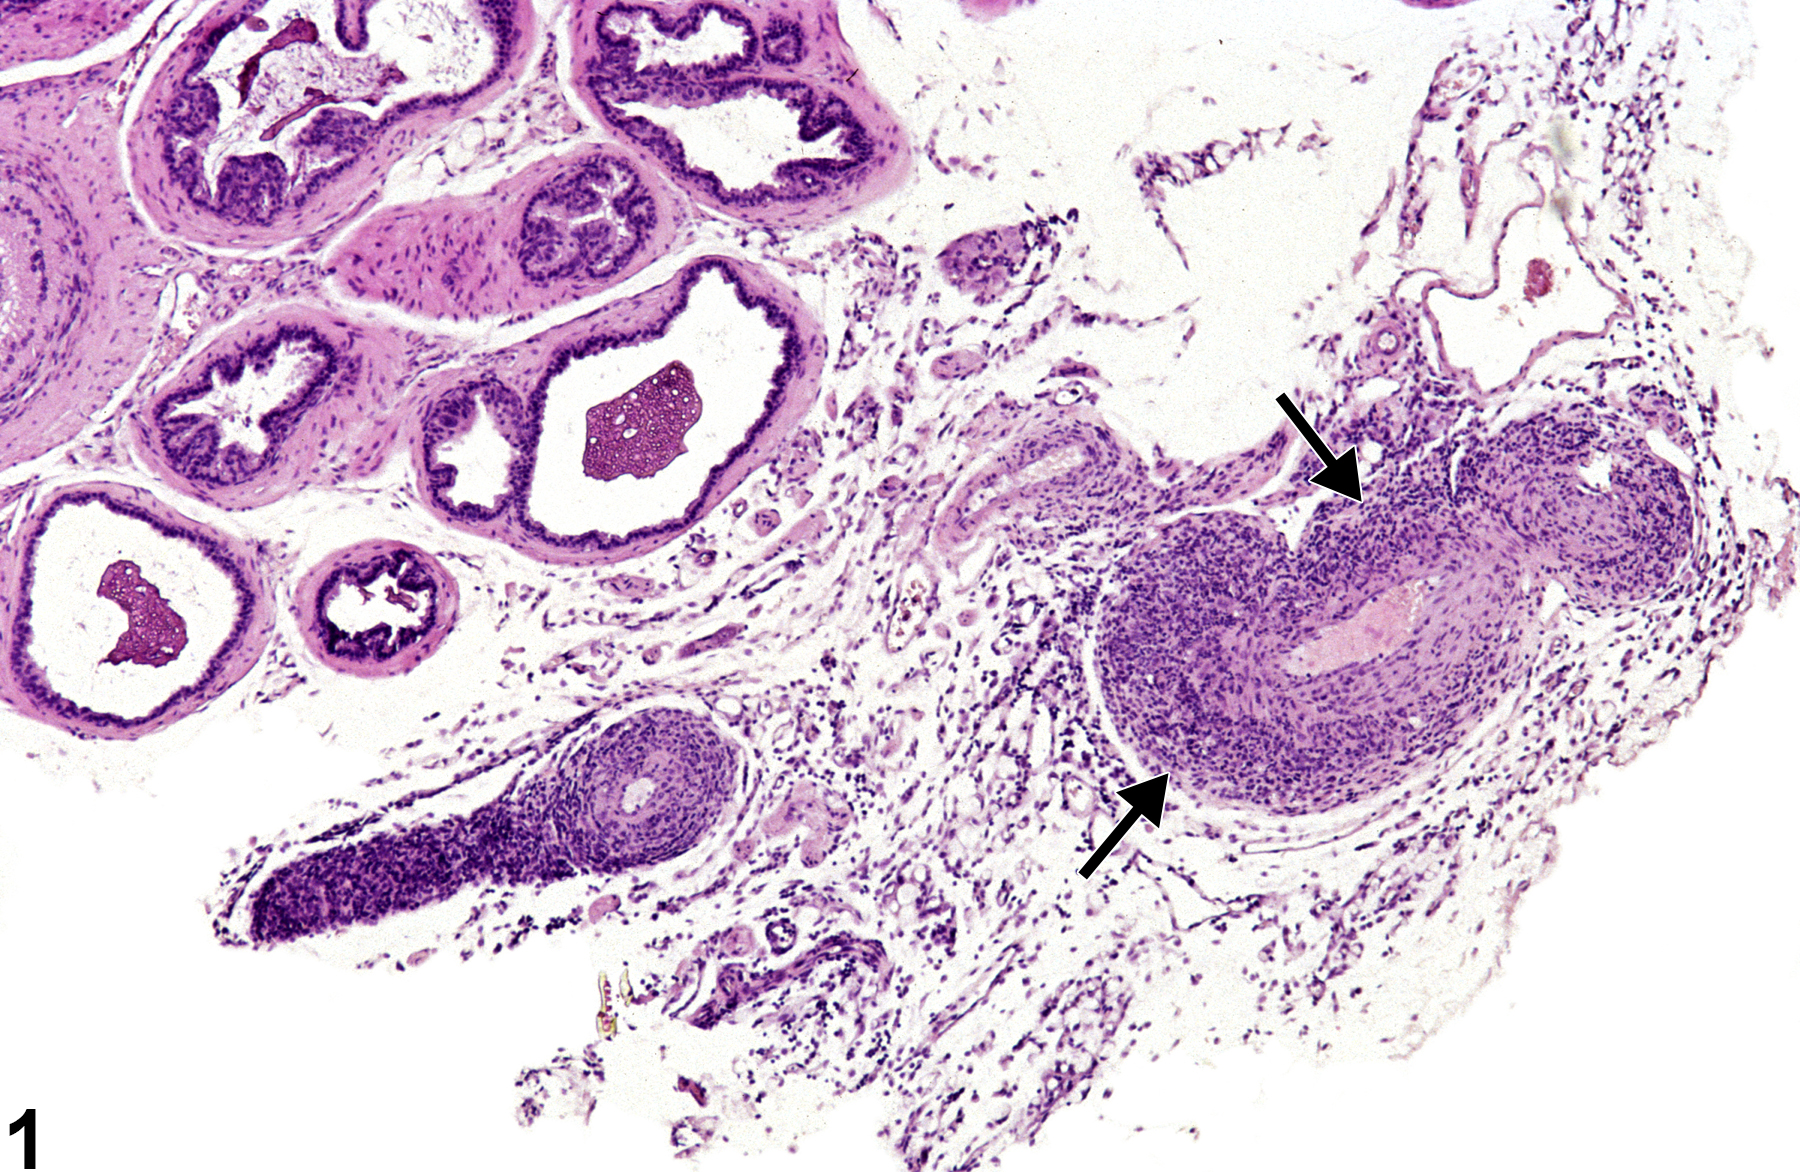 Image of polyarteritis nodosa in the prostate from a male B6C3F1/N mouse in a chronic study